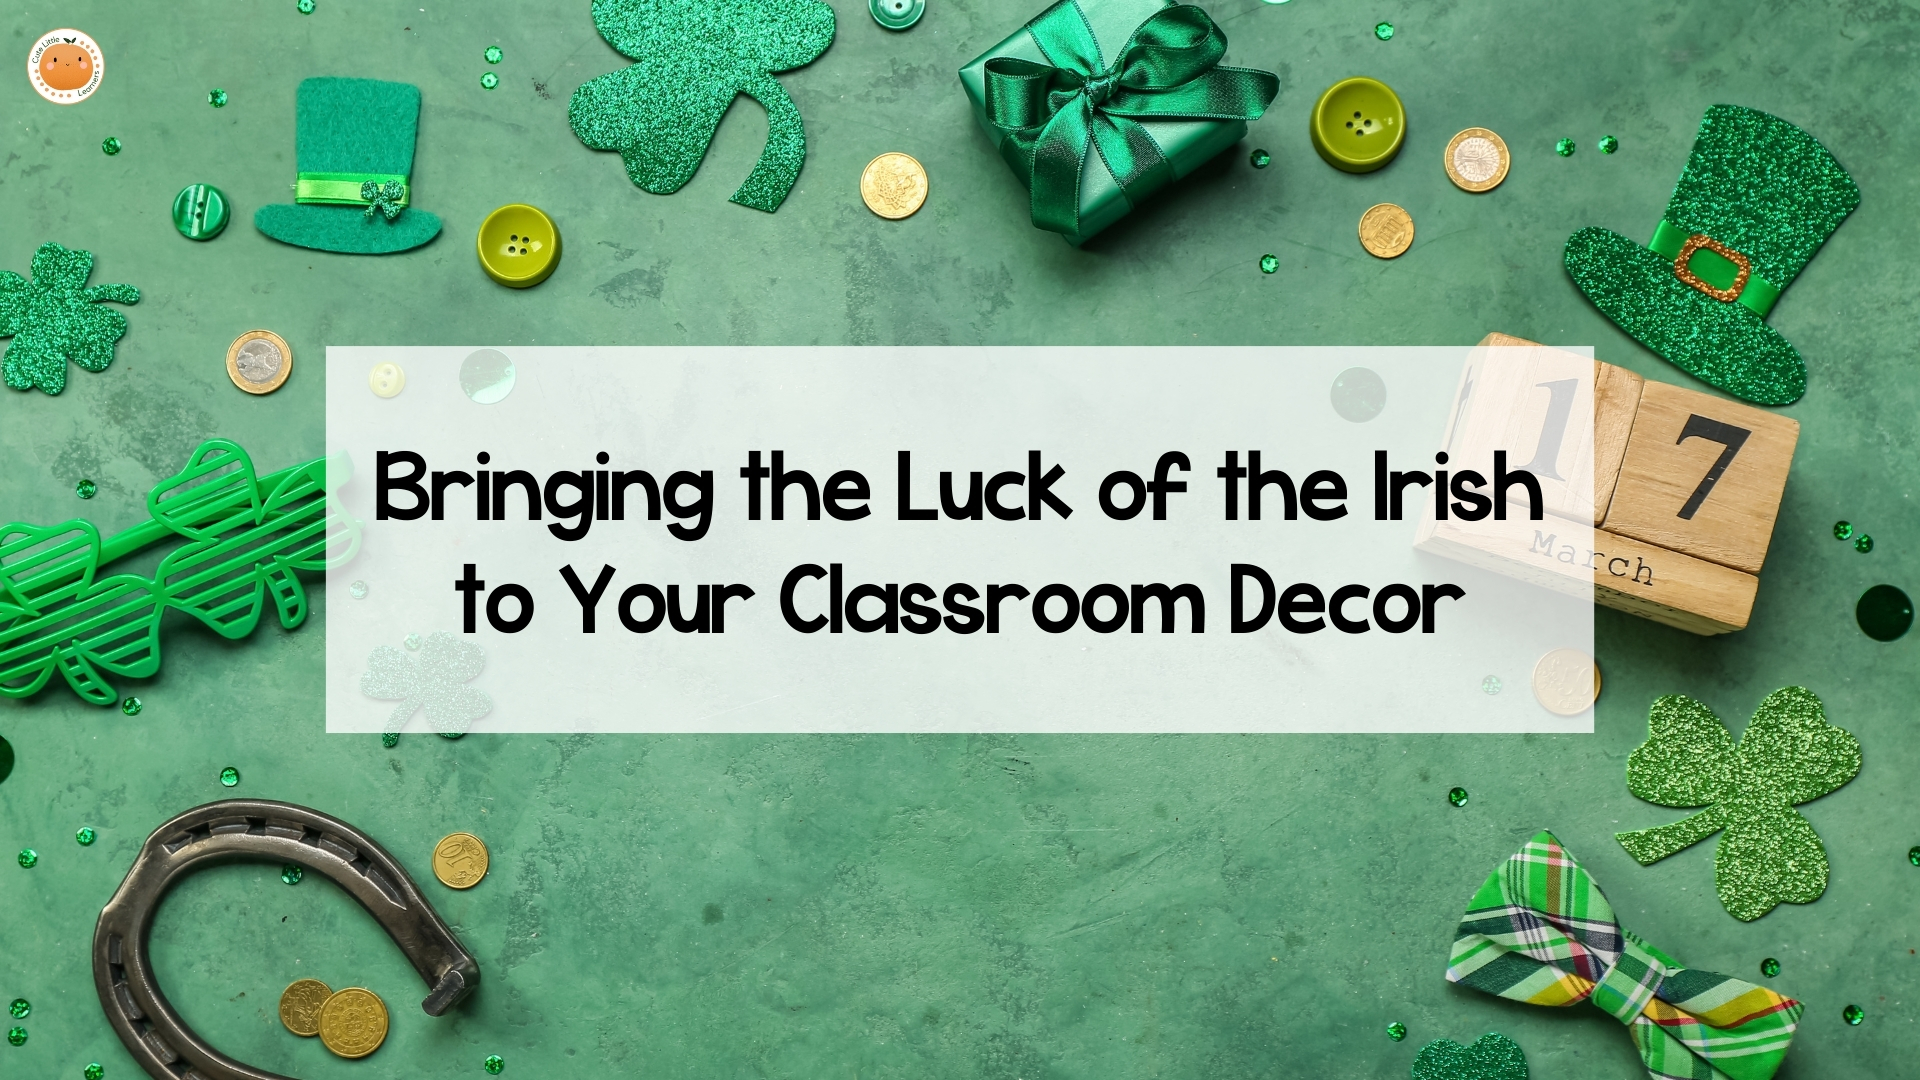 Bring the Luck of the Irish to Your Classroom Decor